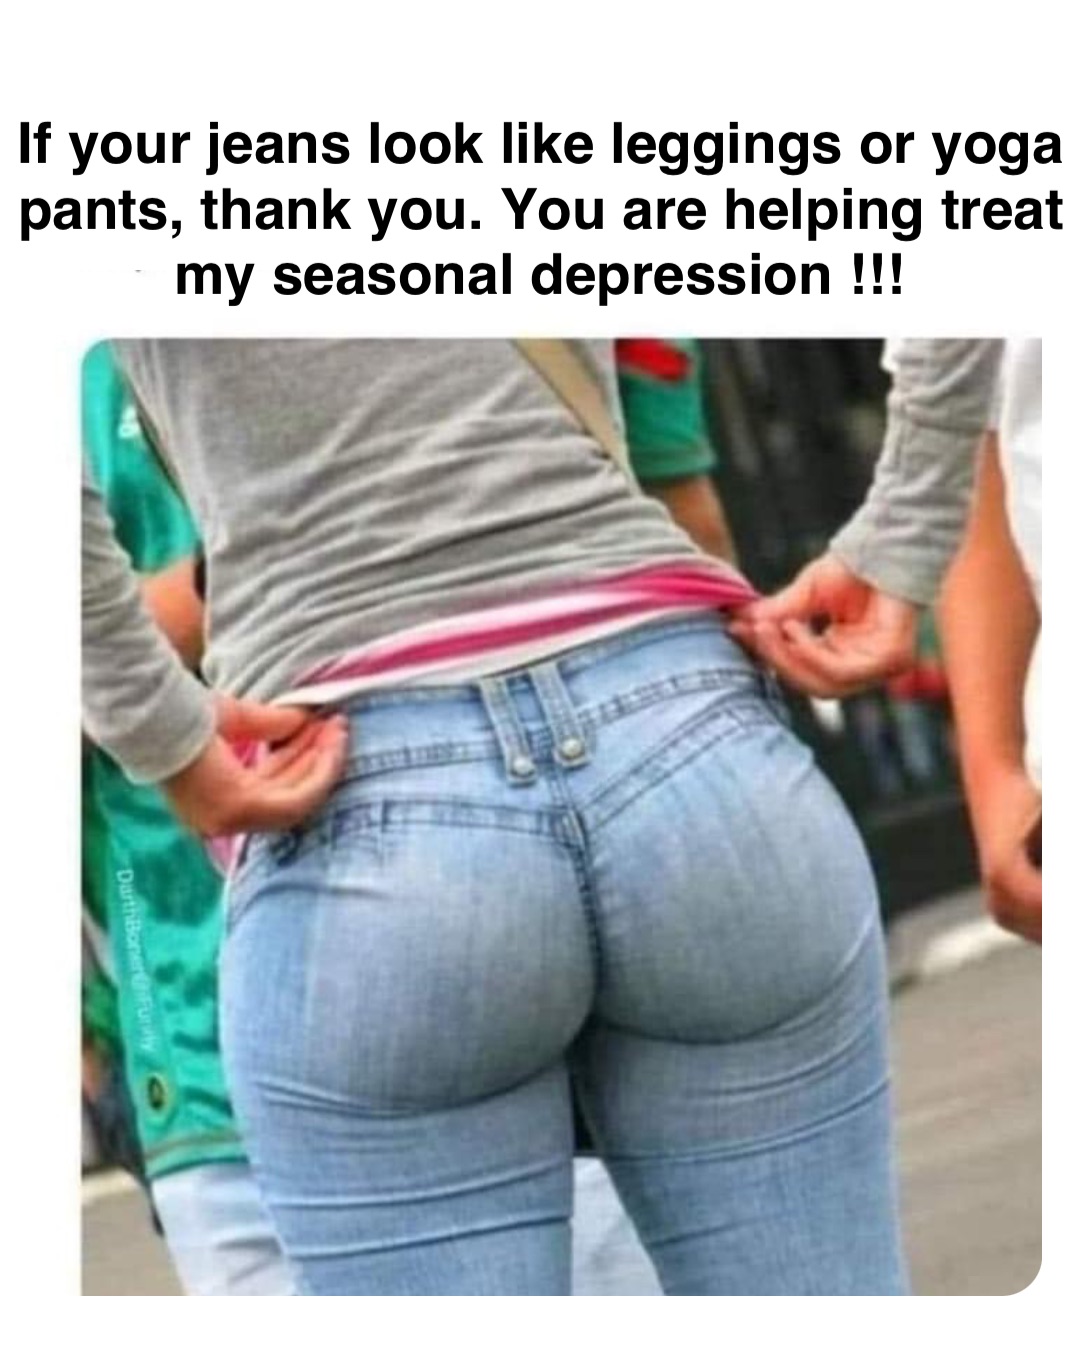 Double tap to edit If your jeans look like leggings or yoga pants, thank  you. You are helping treat my seasonal depression !!!, @robinhoodprinceofmemes